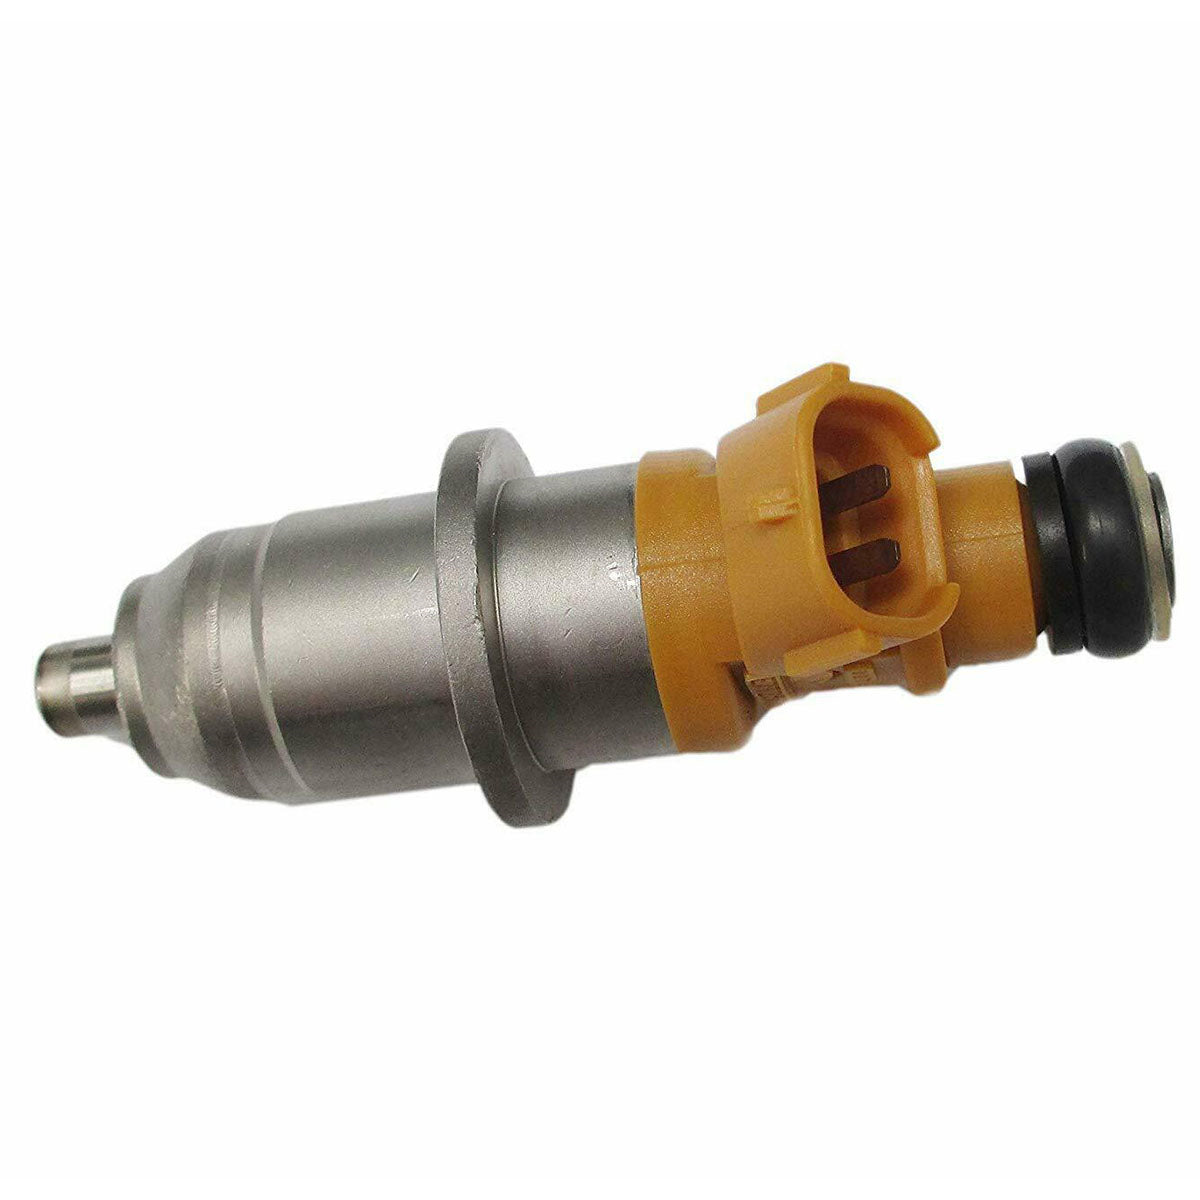 Fuel Injector 60V-13761-00-00, Fuel Injector for 2003-2007 Yamaha, Daysyore Fuel Injector, Car Fuel Injector, Auto Fuel Injector